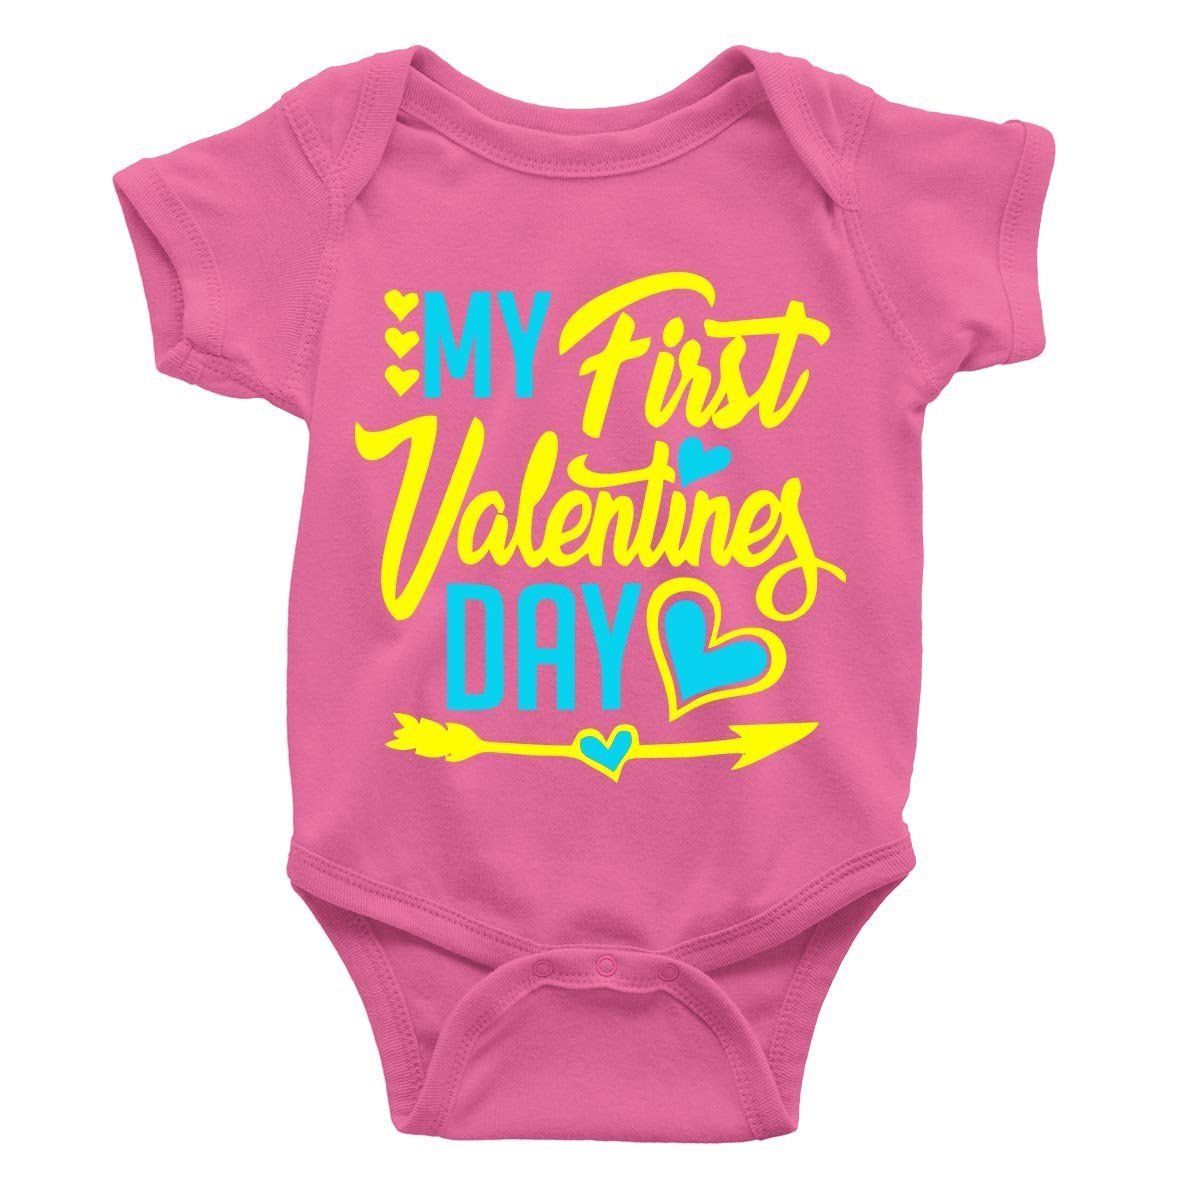 jopo my first valentine's day romper baby dress infant photoshoot Pink